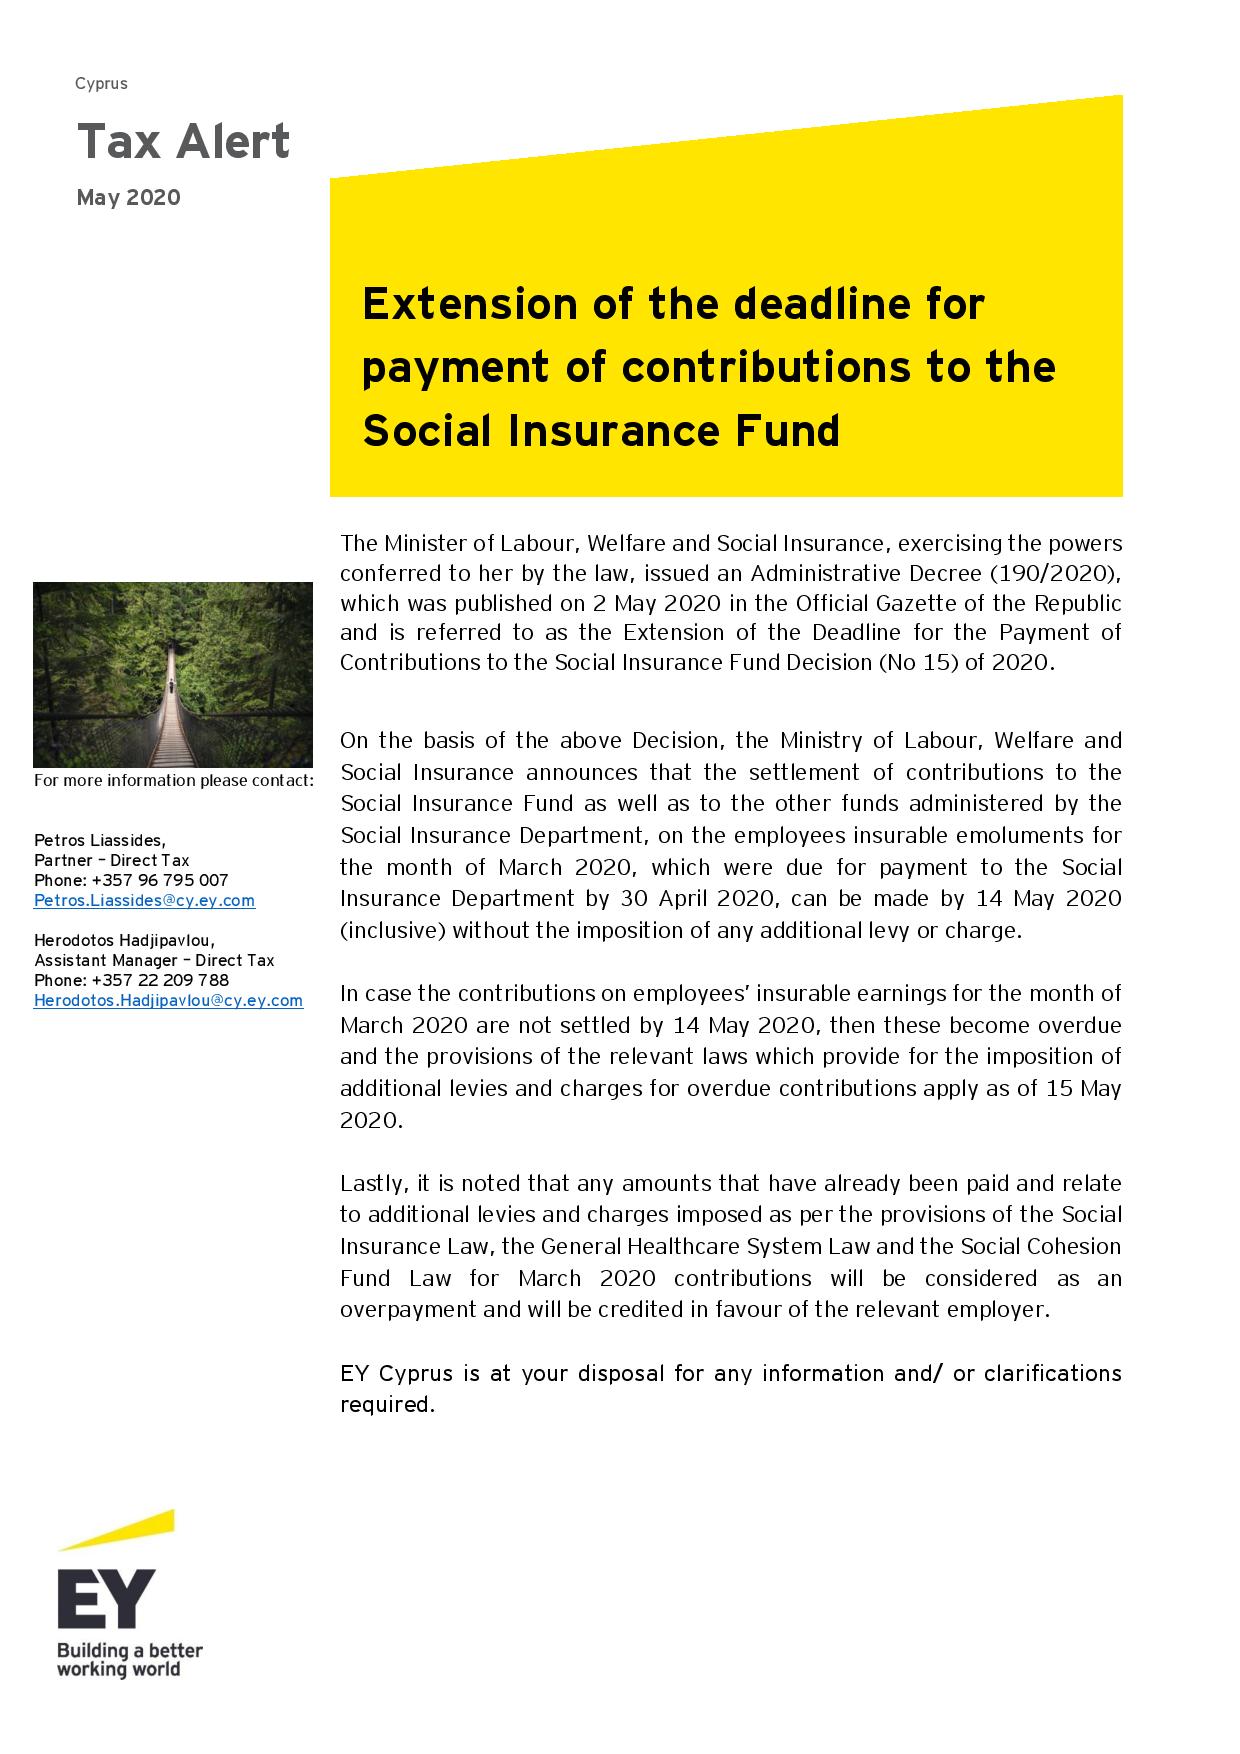 EY Cyprus: Extension of the deadline for payment of contributions to the Social Insurance Fund